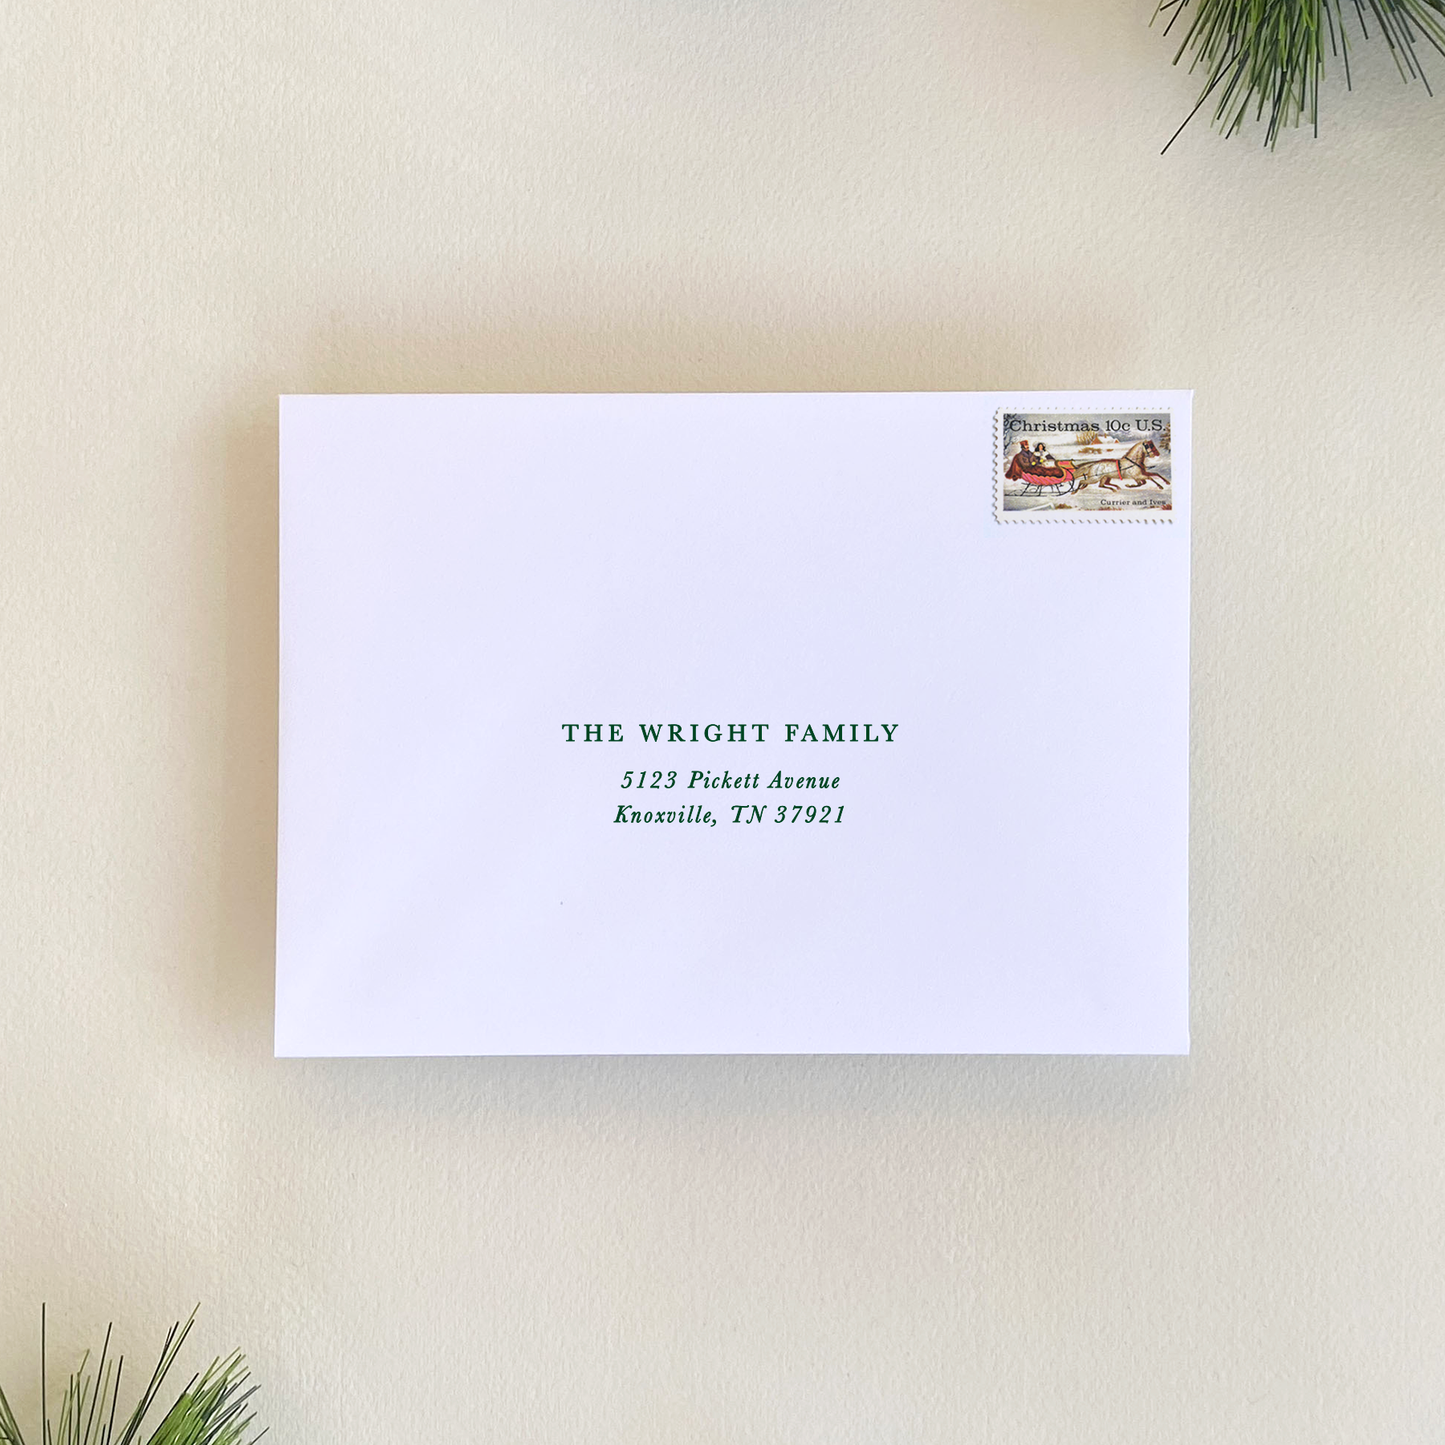 Norway Spruce Gingham Holiday Card, Portrait